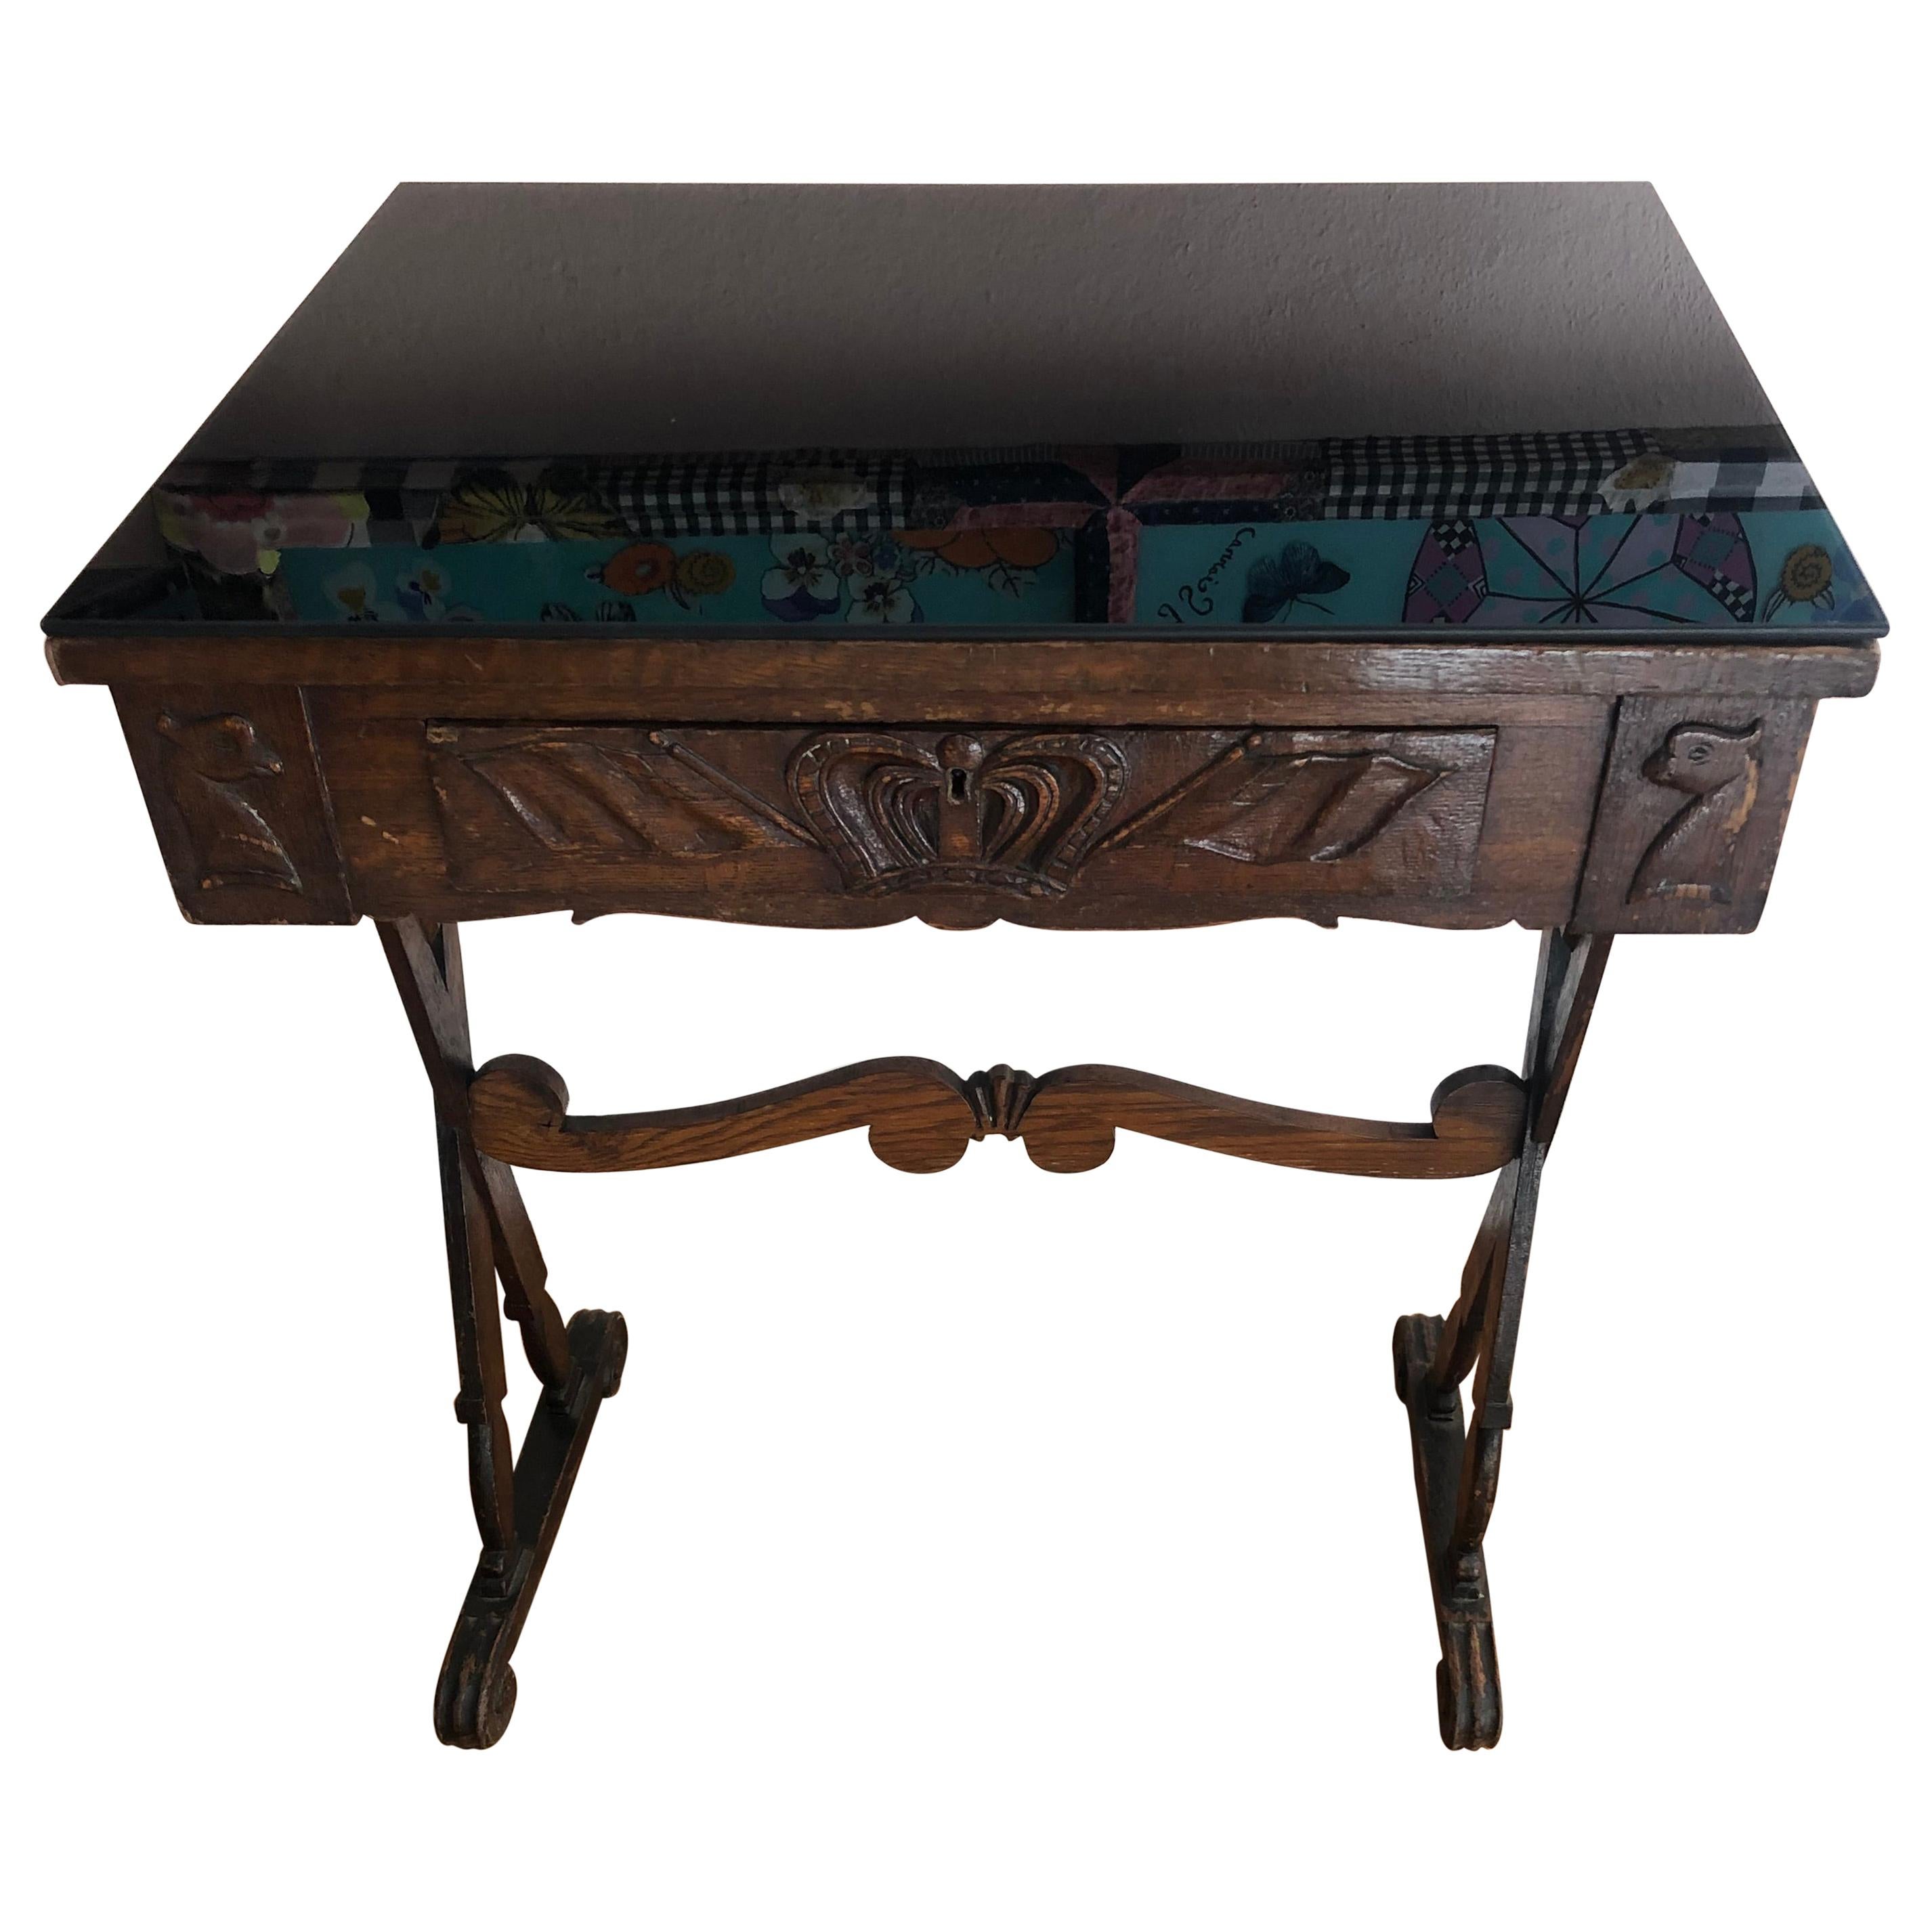 Charming Antique English Carved Oak End Table with Crown and Black Glass Top